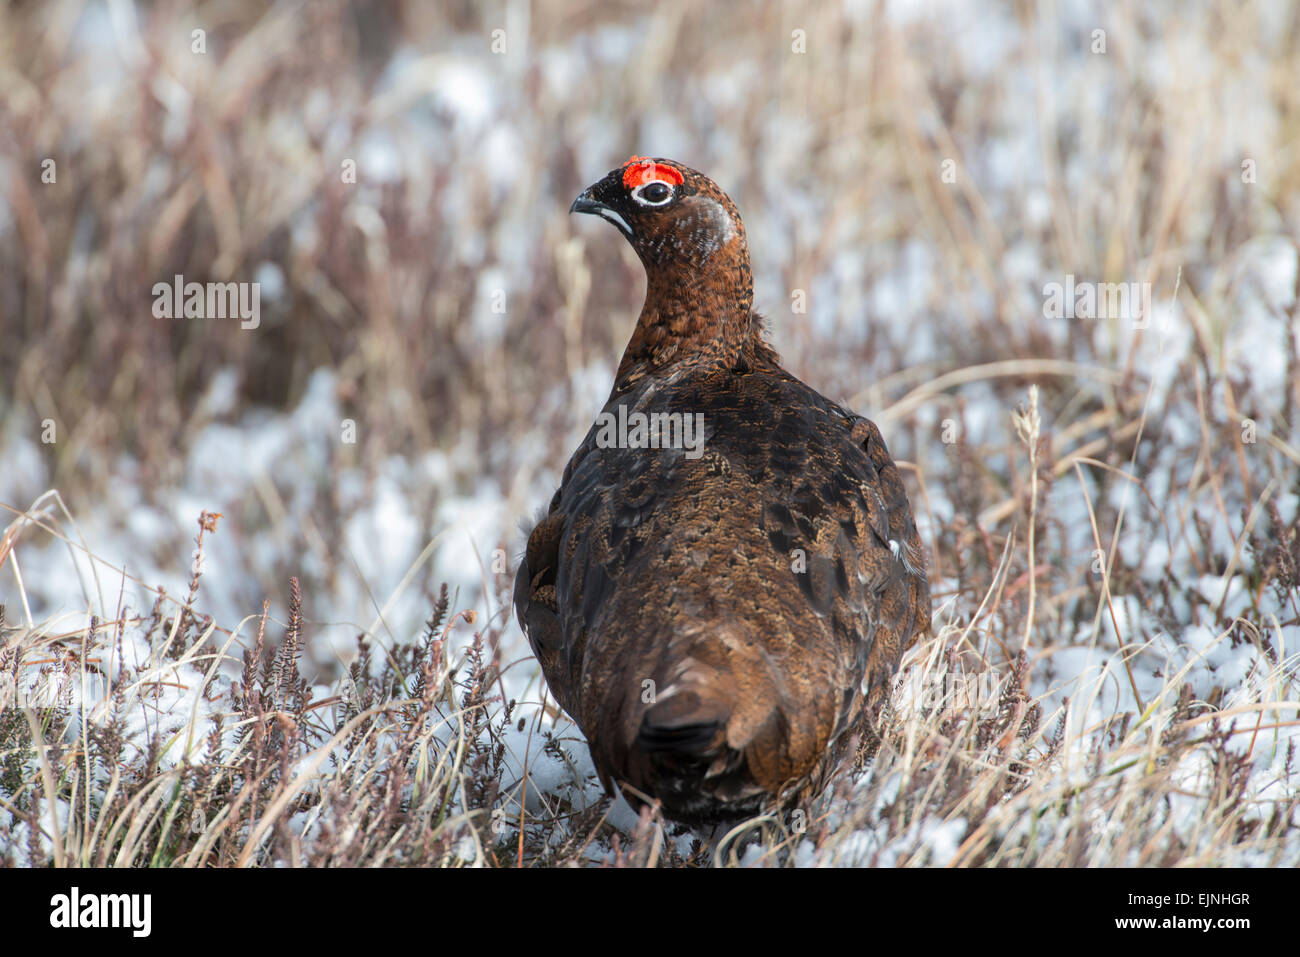 Red grouse (Lagopus lagopus scotica). The Scottish race of the willow grouse. Adult male photographed after a snow storm. Stock Photo